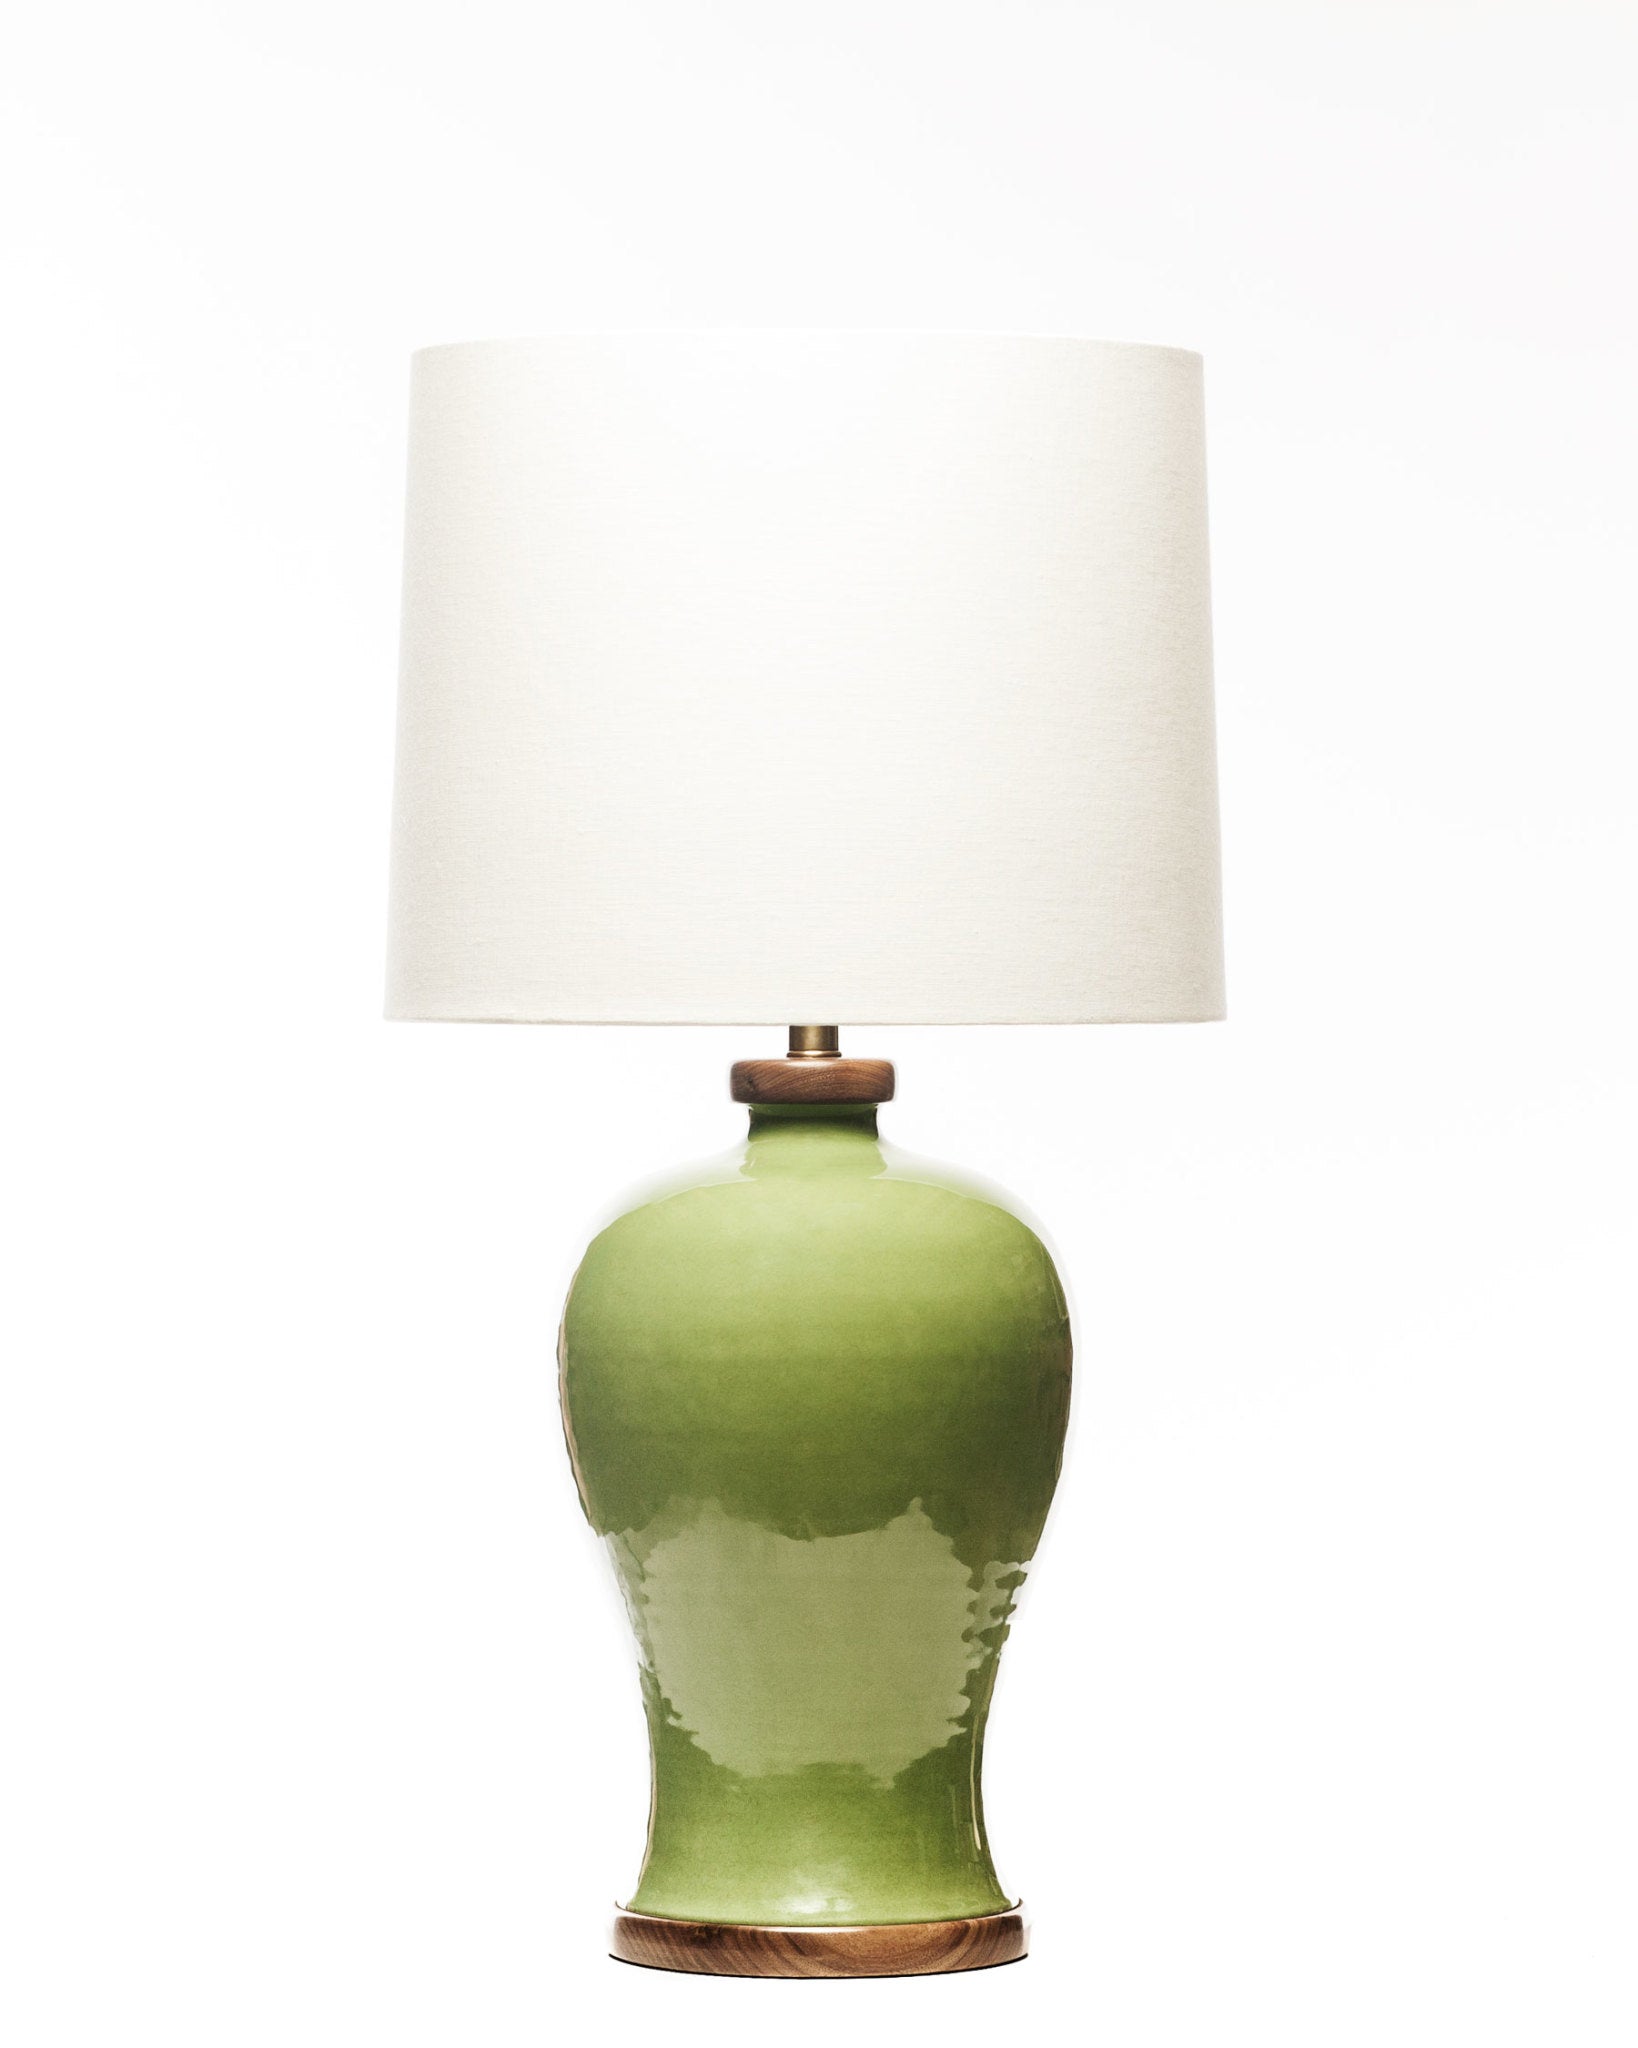 Lawrence & Scott Dashiell Table Lamp in Celadon with Walnut Base